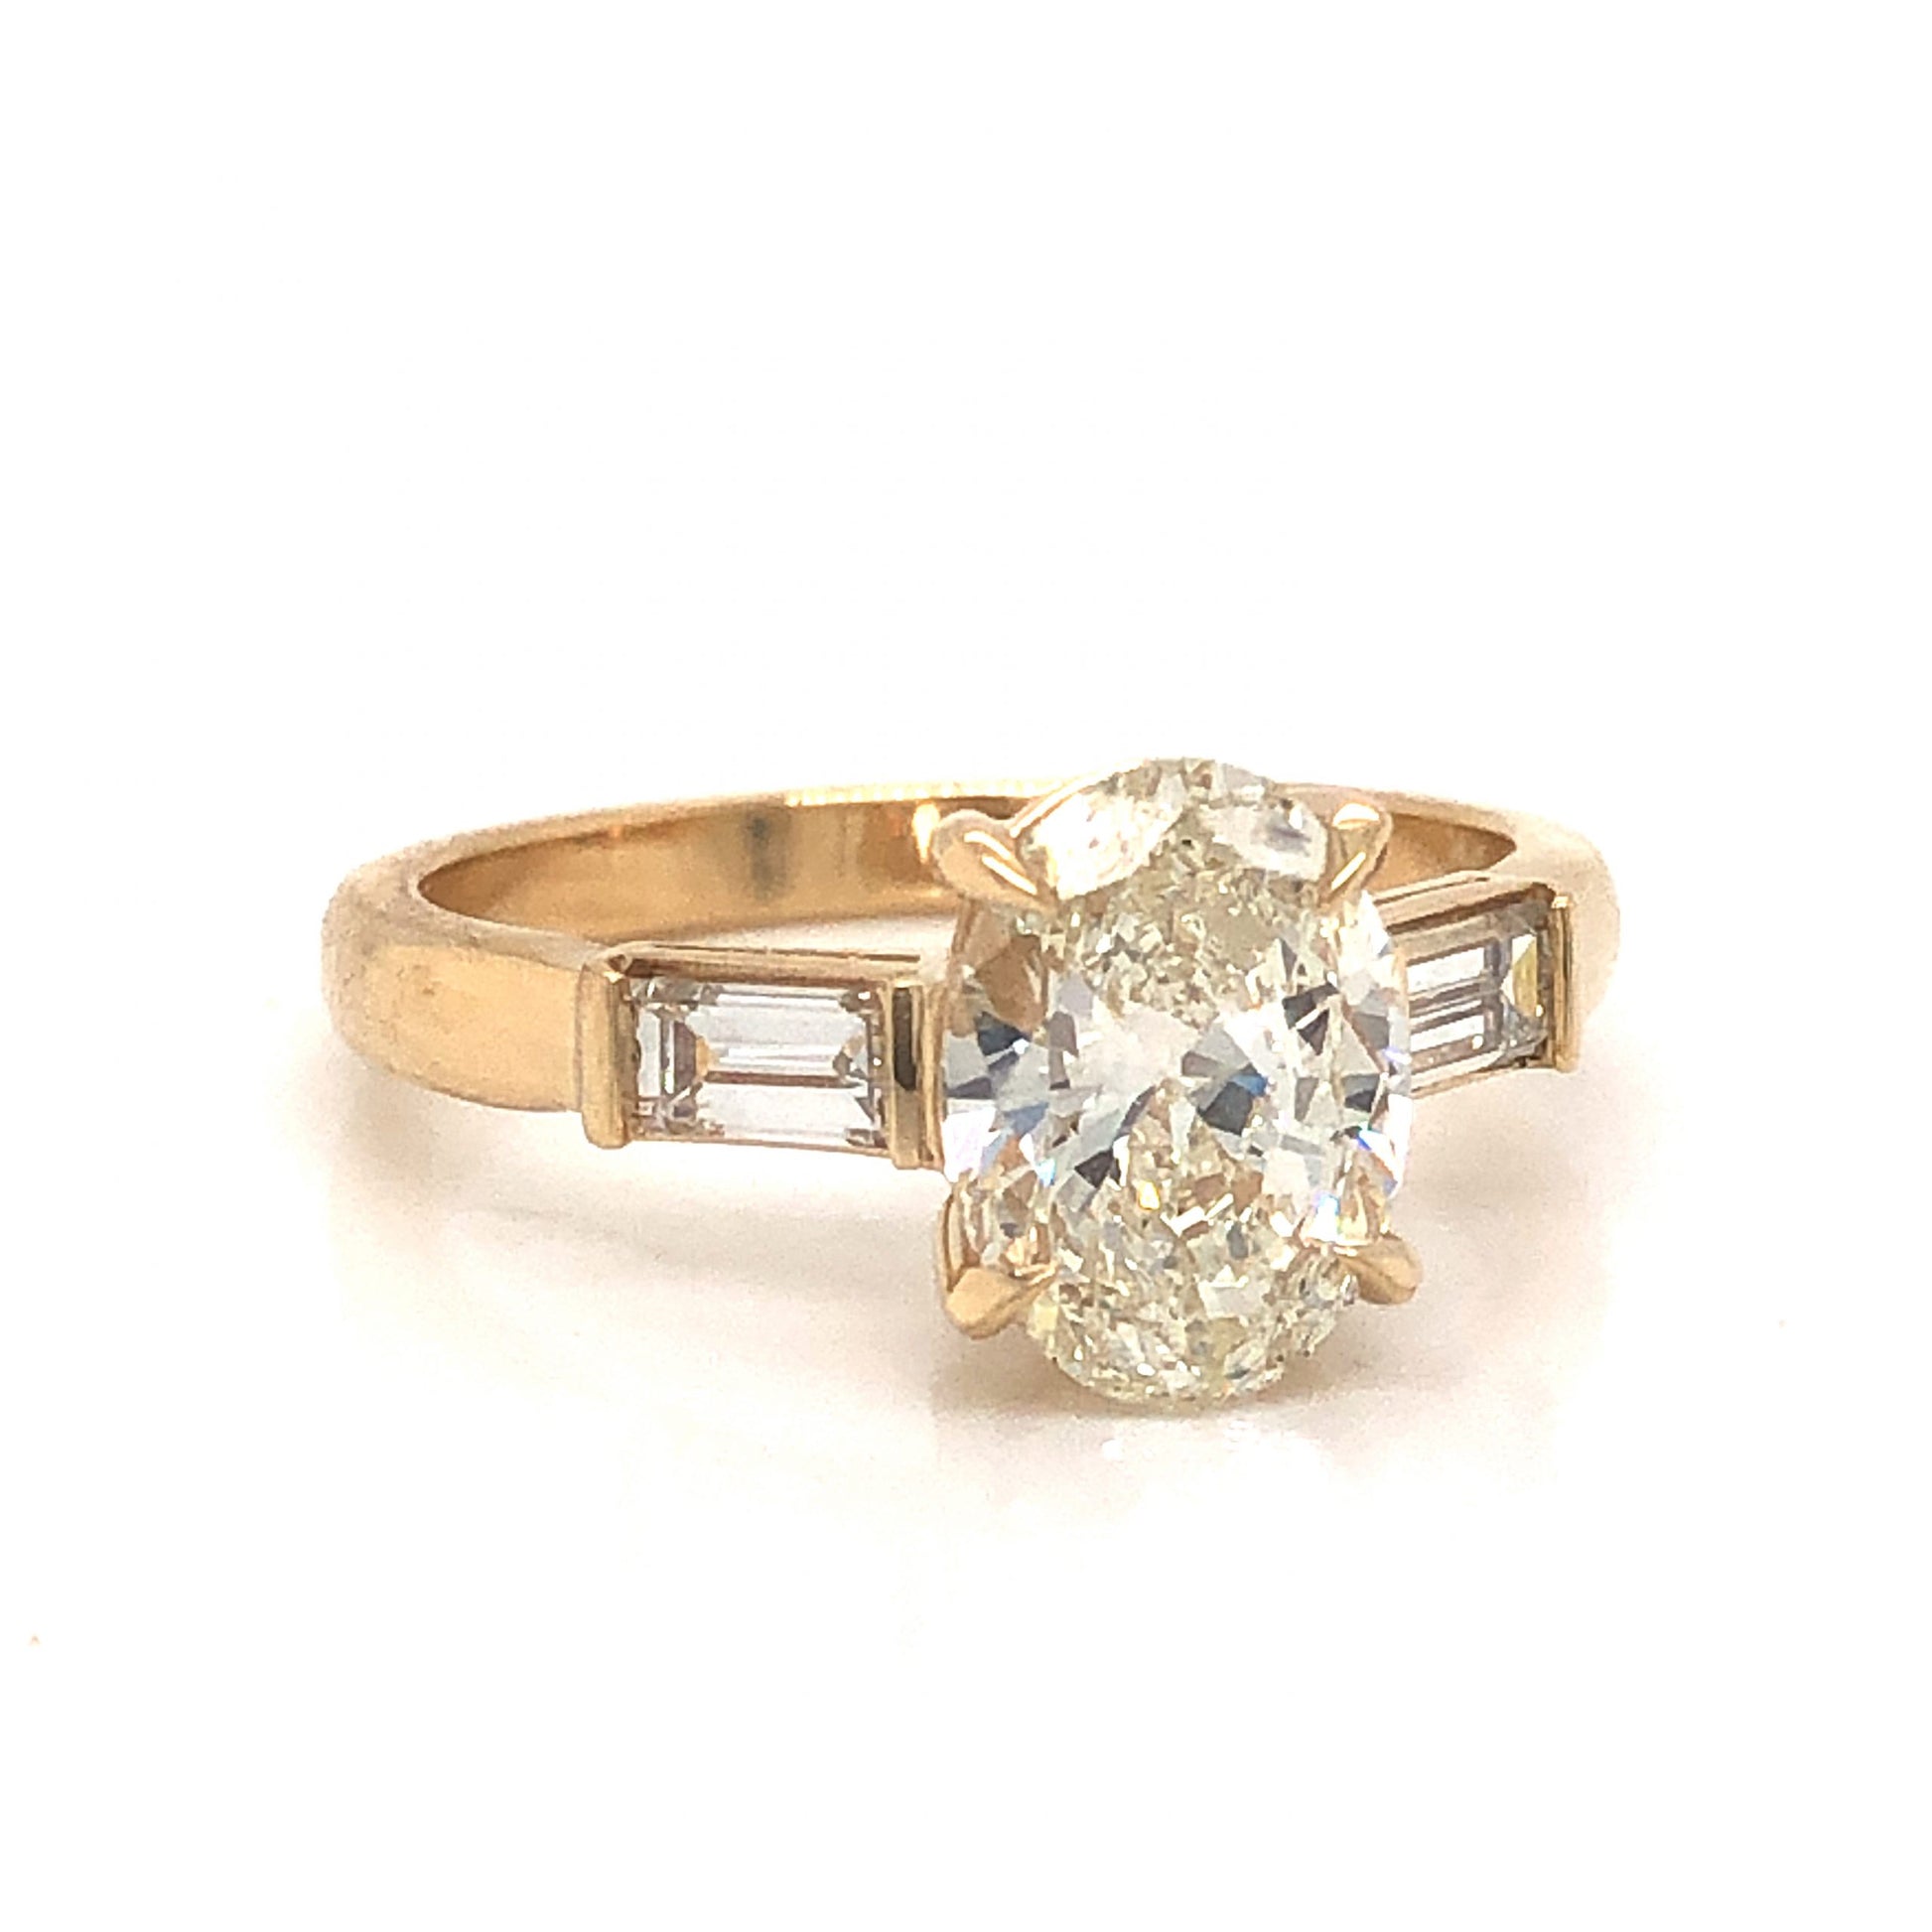 Oval Cut 1.51 Diamond Engagement Ring in 14k Yellow GoldComposition: 14 Karat Yellow GoldRing Size: 6.25Total Diamond Weight: 1.91 ctTotal Gram Weight: 3.2 gInscription: 14k